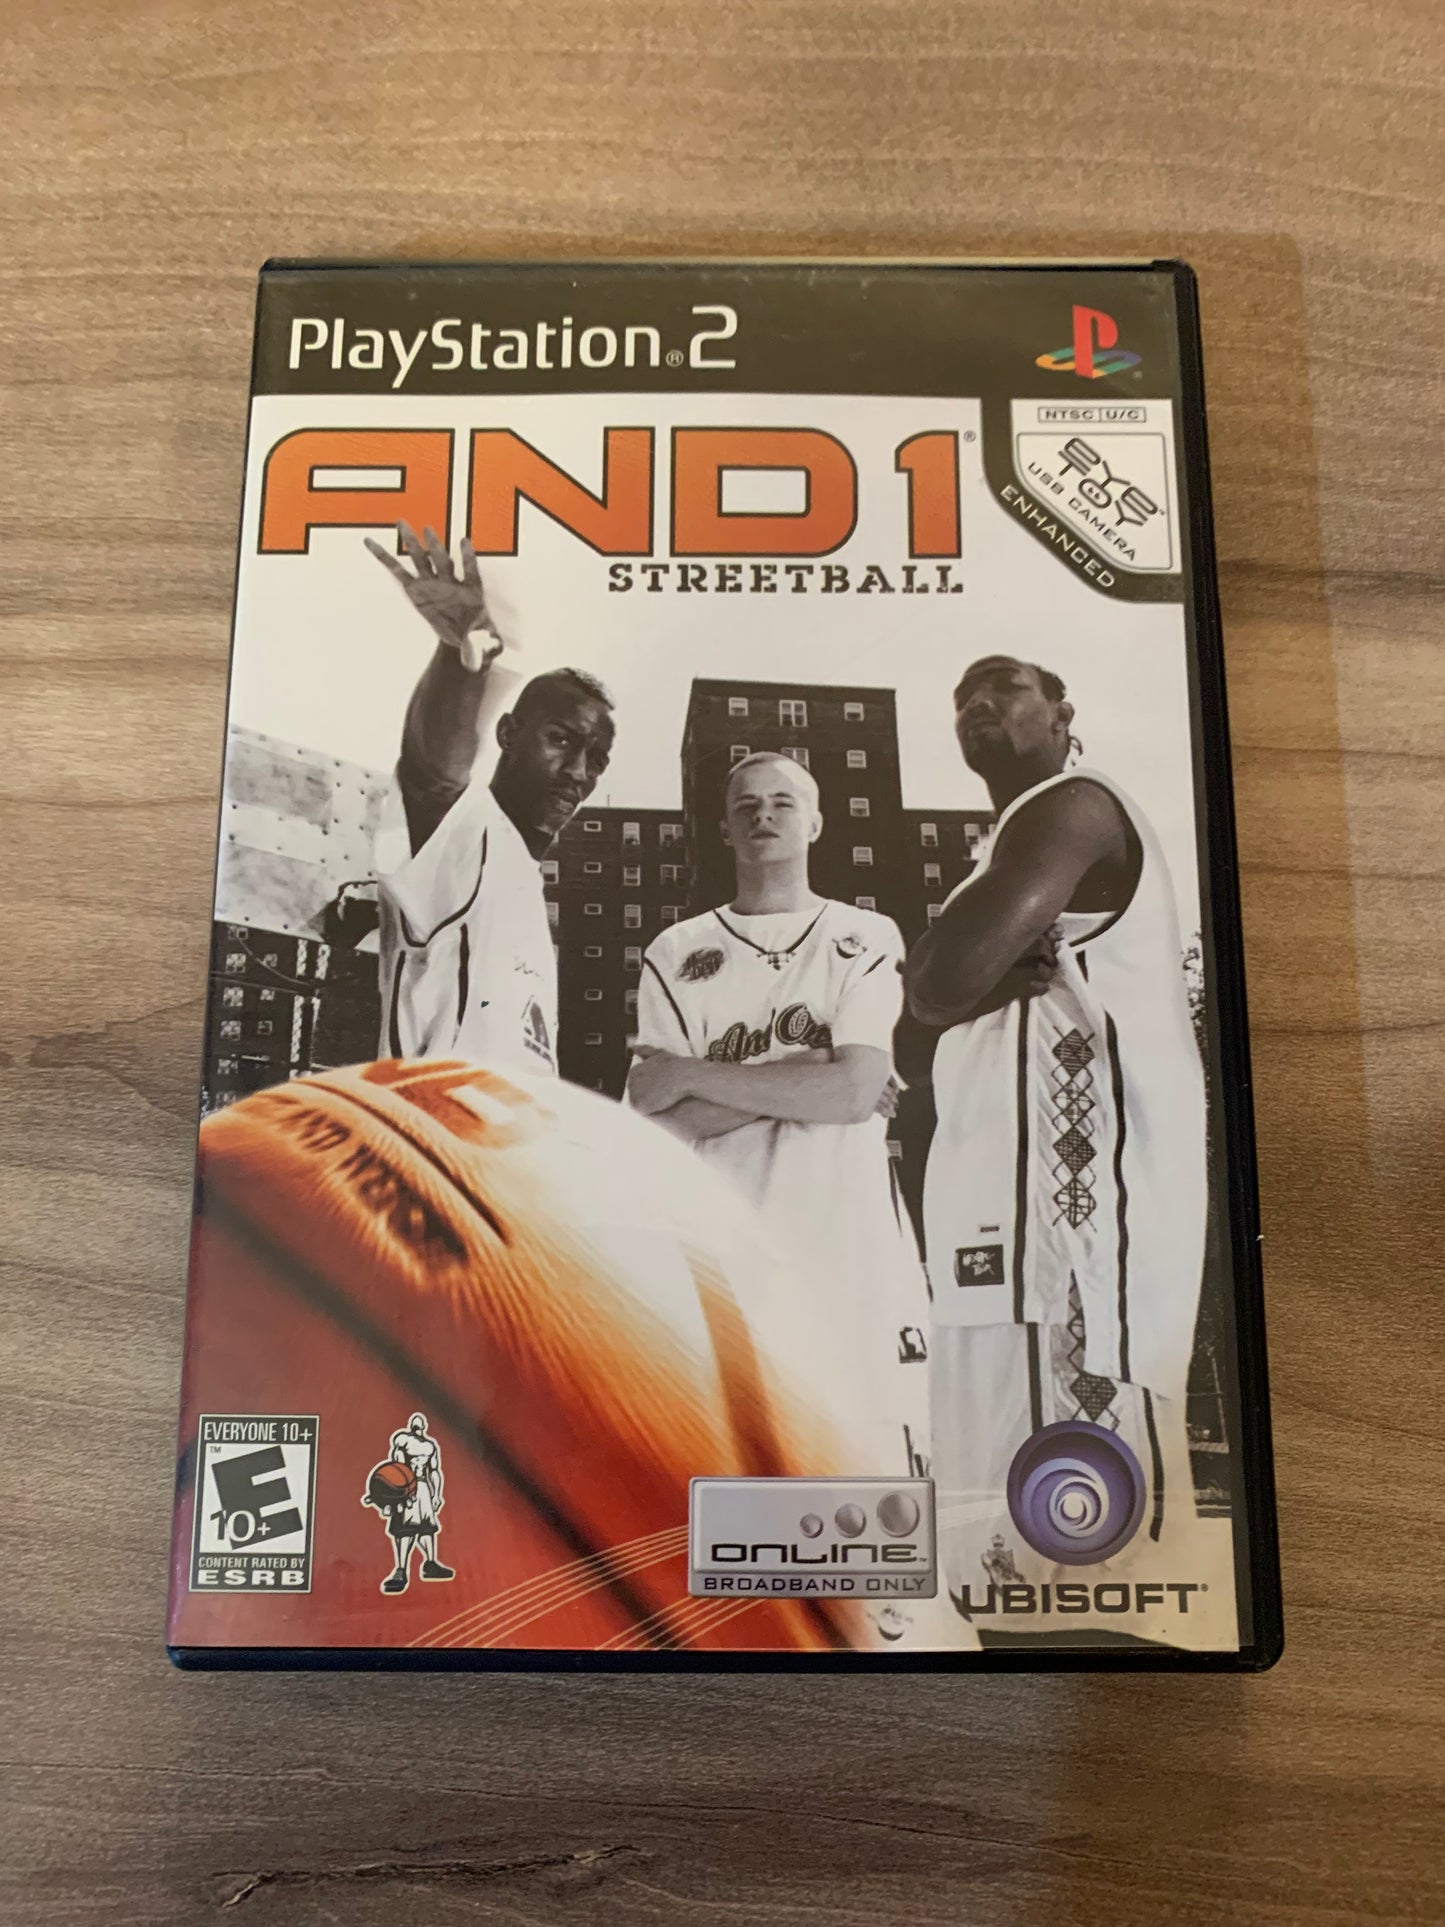 SONY PLAYSTATiON 2 [PS2] | AND 1 STREETBALL